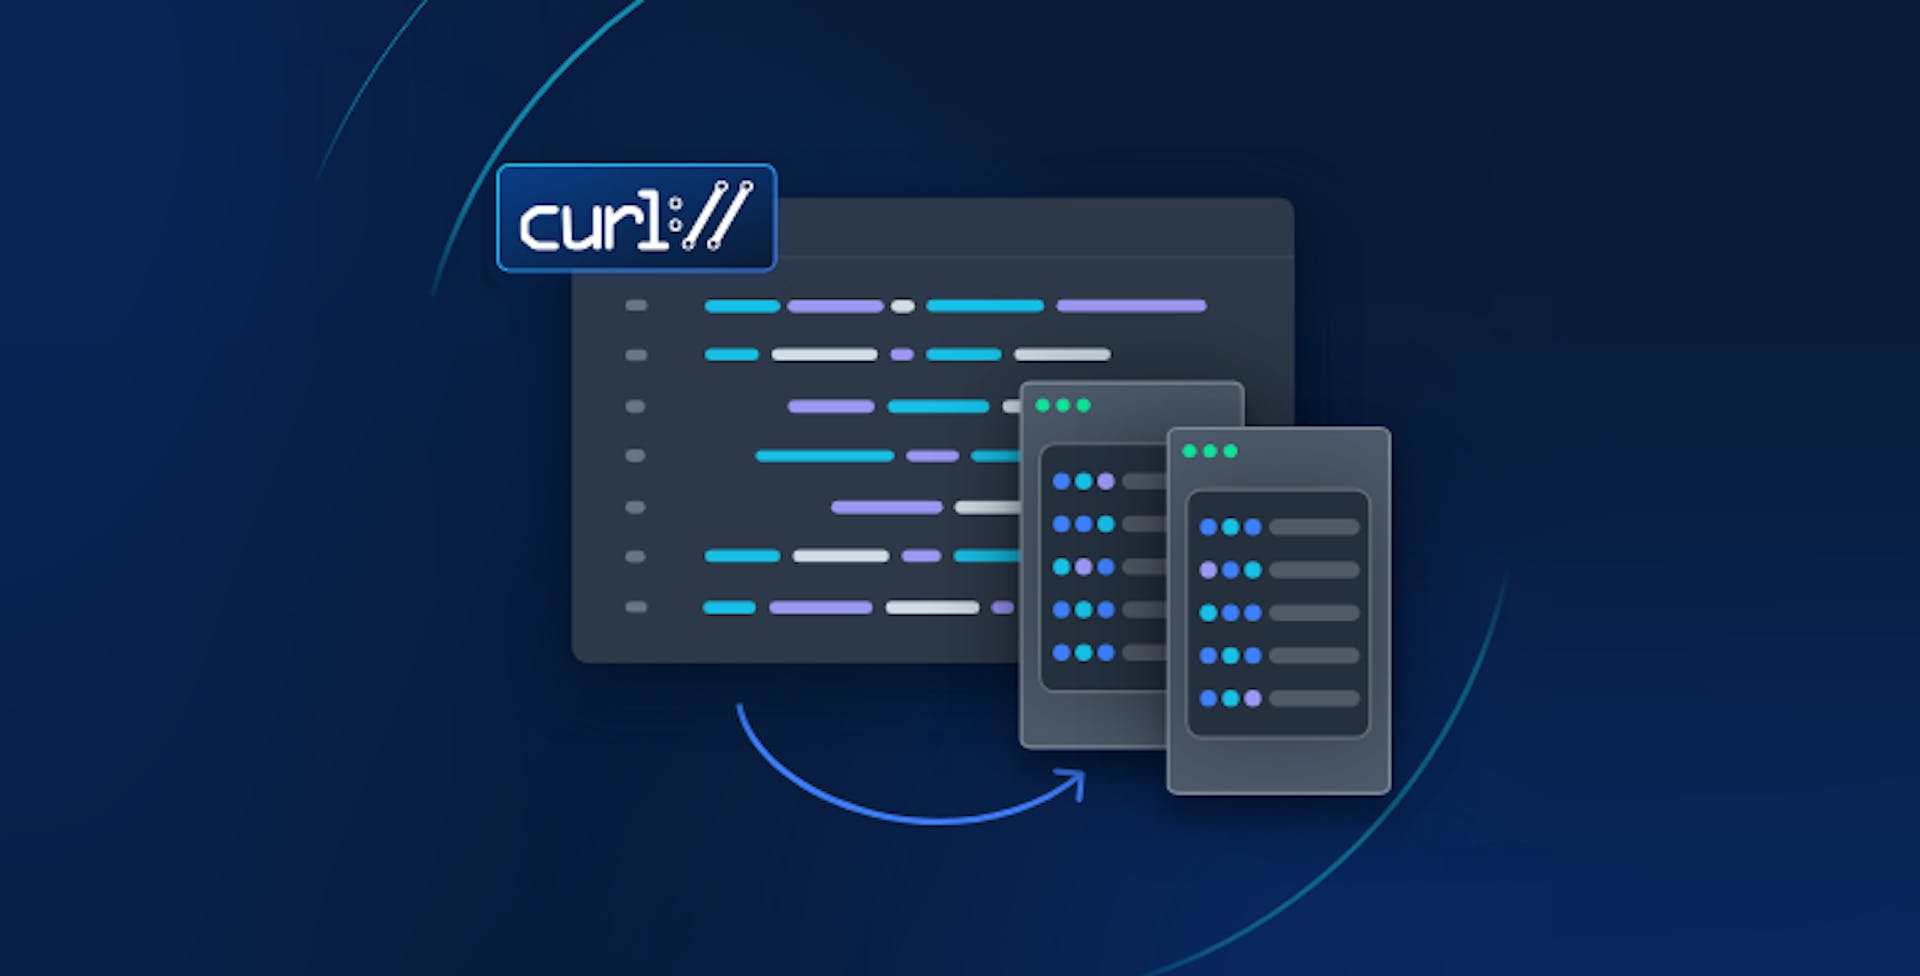 featured image - cURL 简介：最流行的 HTTP 客户端